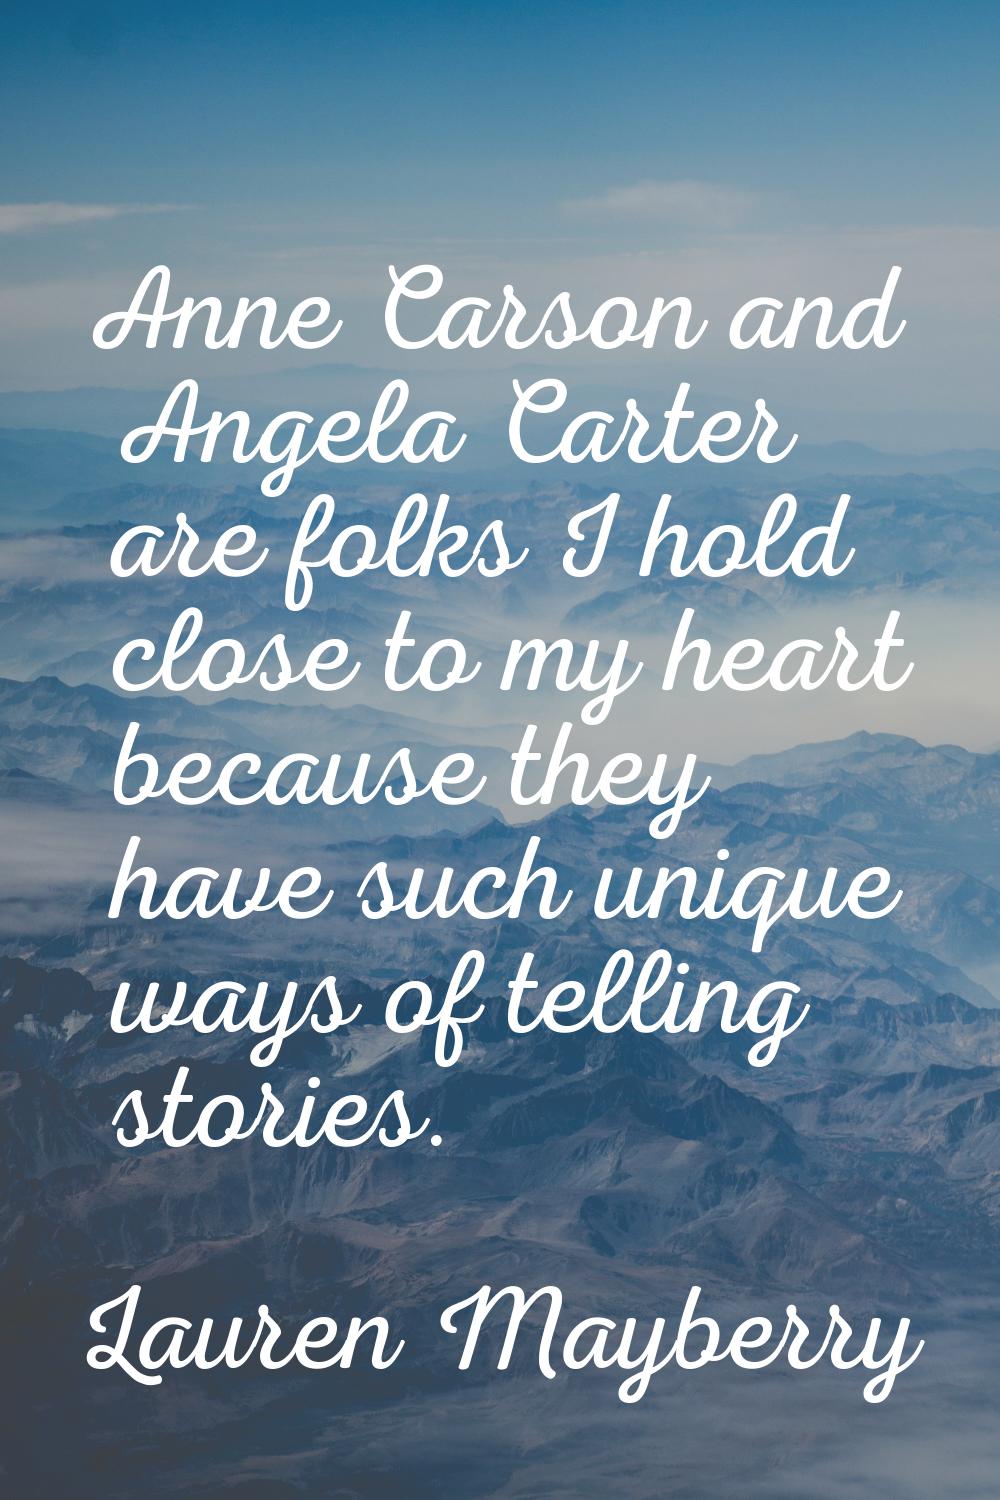 Anne Carson and Angela Carter are folks I hold close to my heart because they have such unique ways